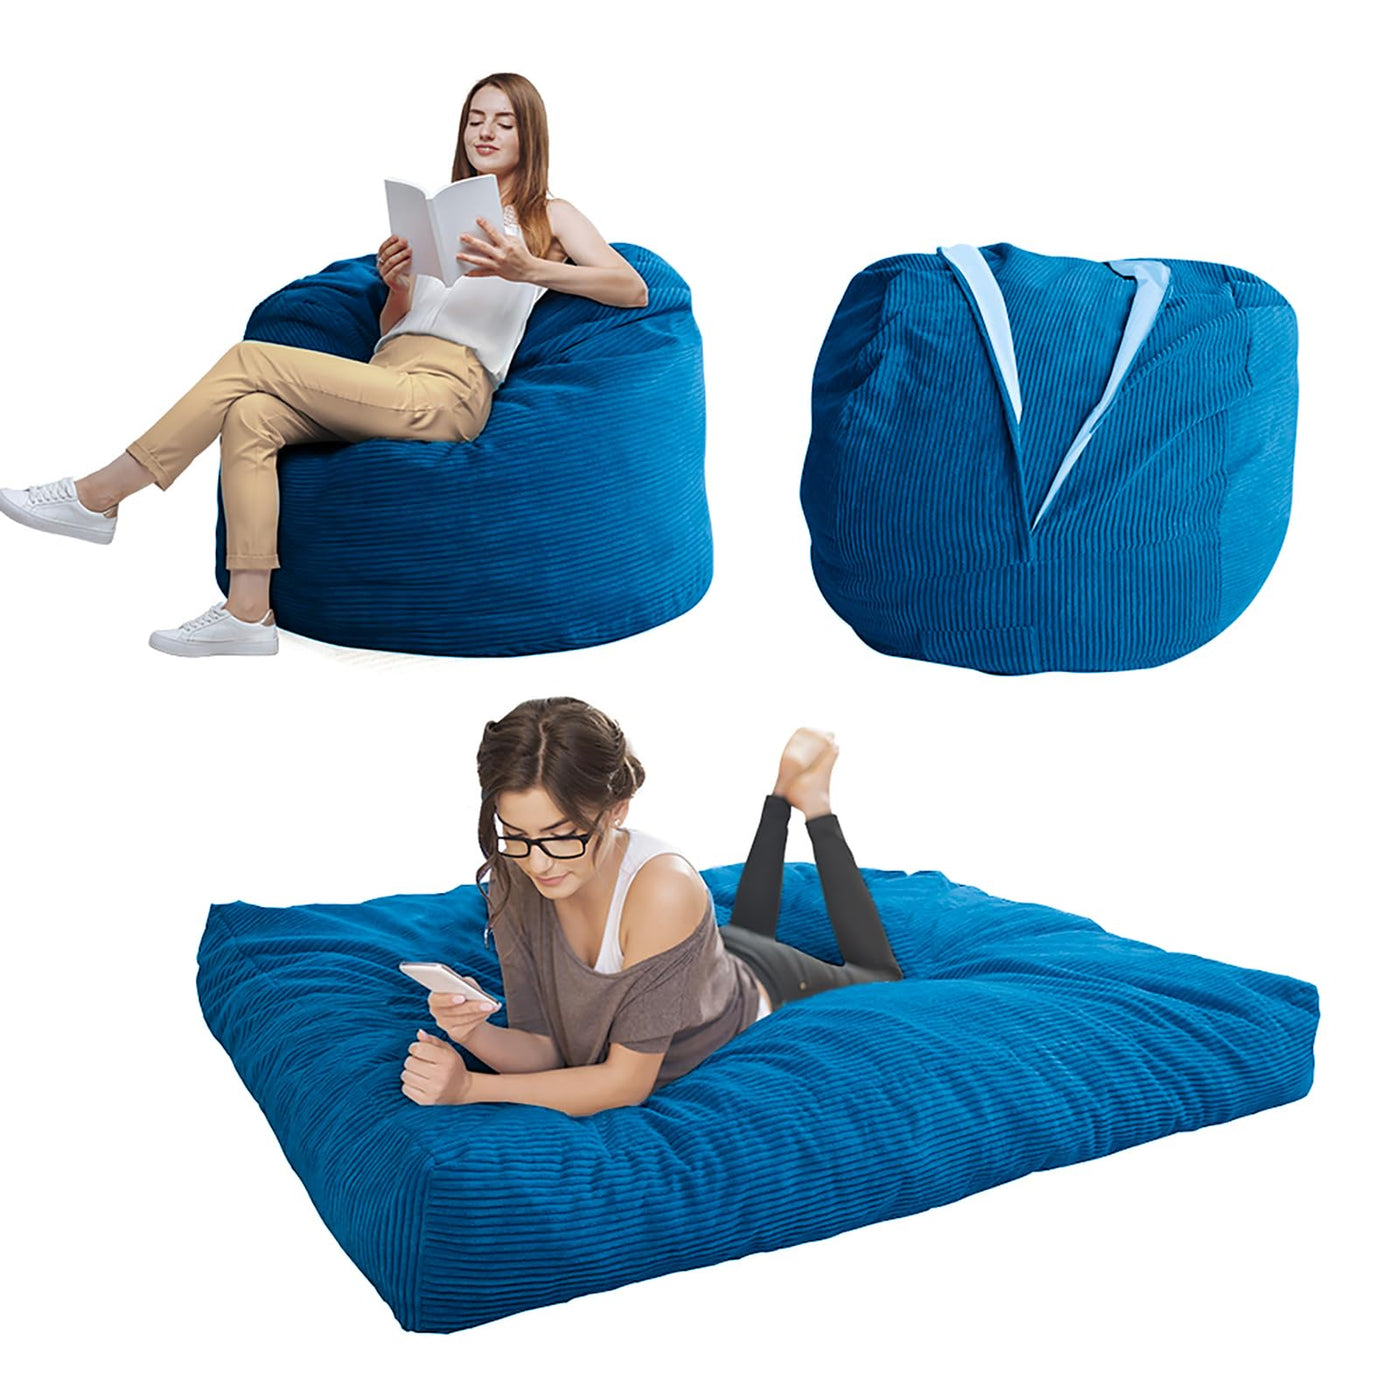 MAXYOYO Giant Bean Bag Chair Bed for Adults, Convertible Beanbag Folds from Lazy Chair to Floor Mattress Bed, Blue